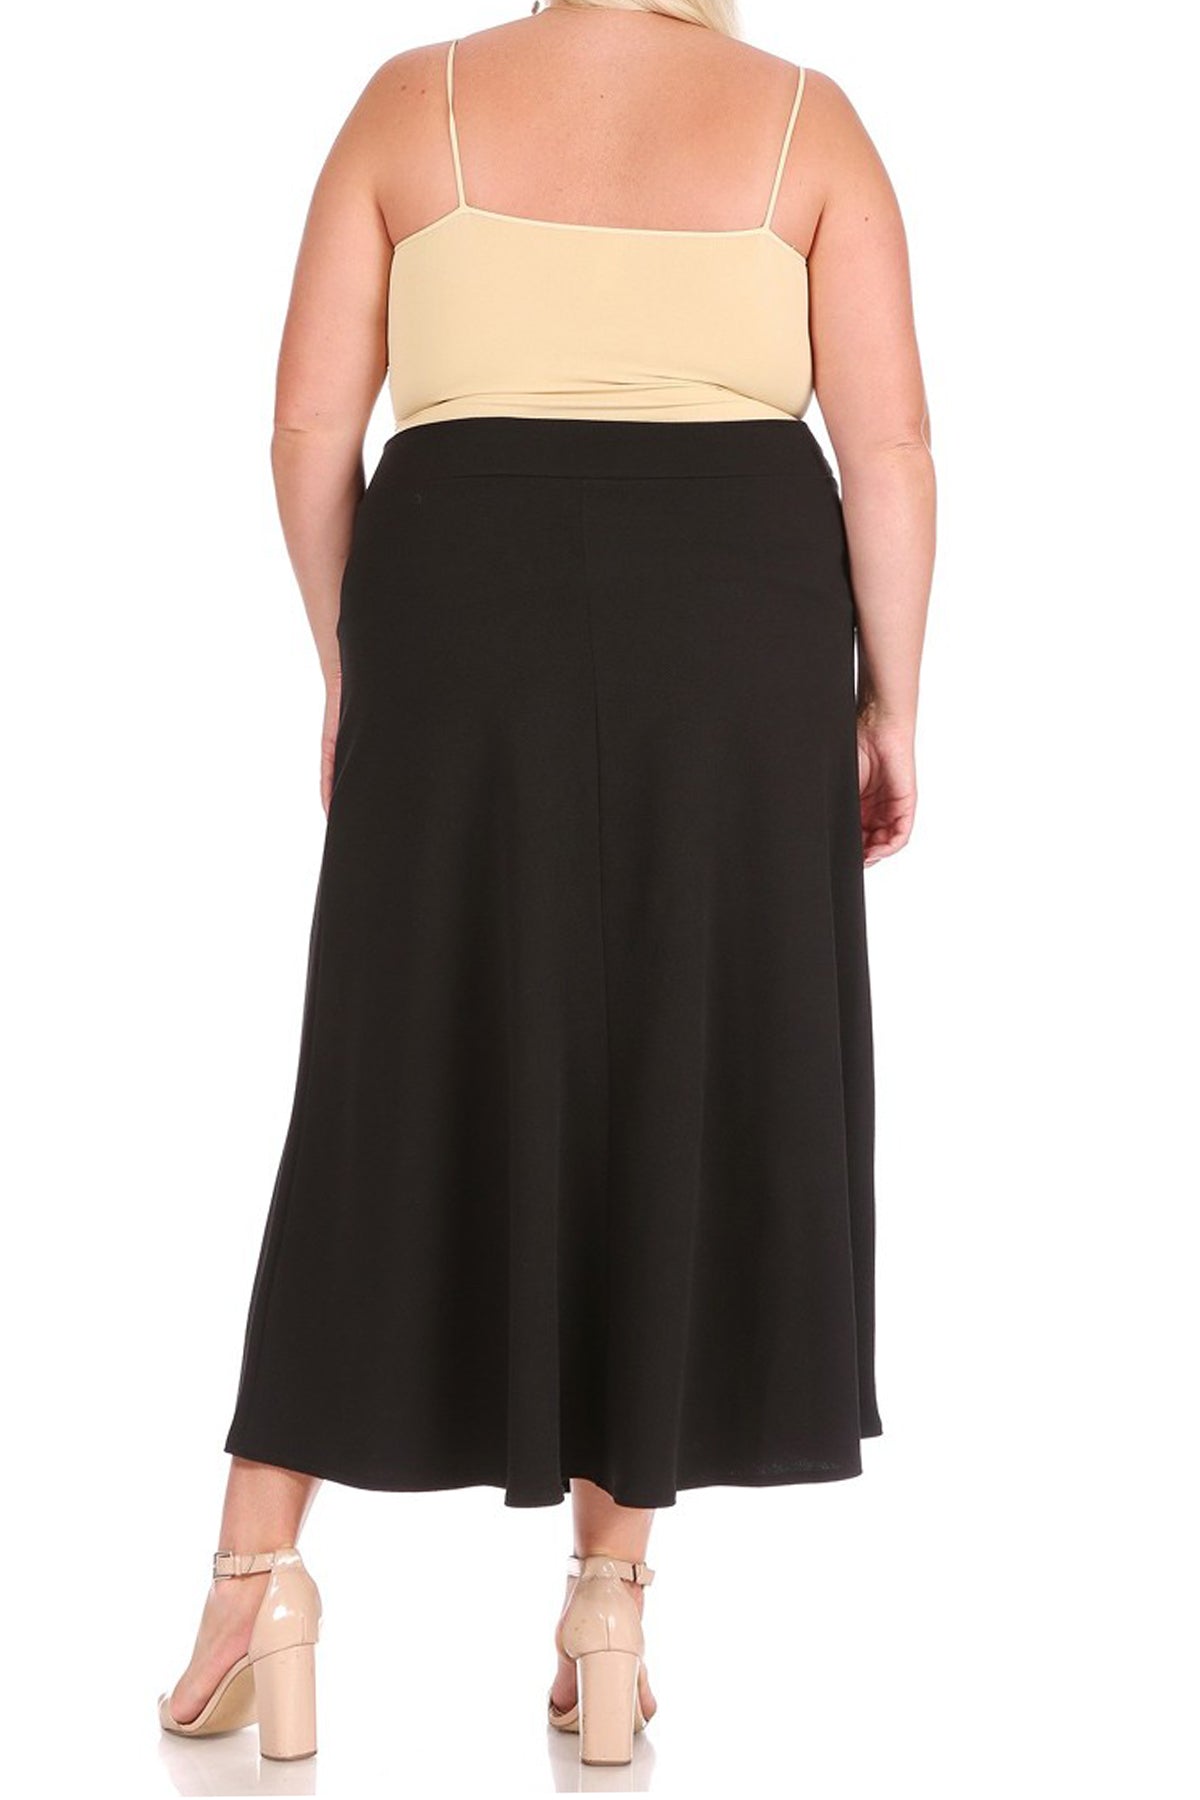 Women's Plus Size Solid  Flare A-line Long Skirt